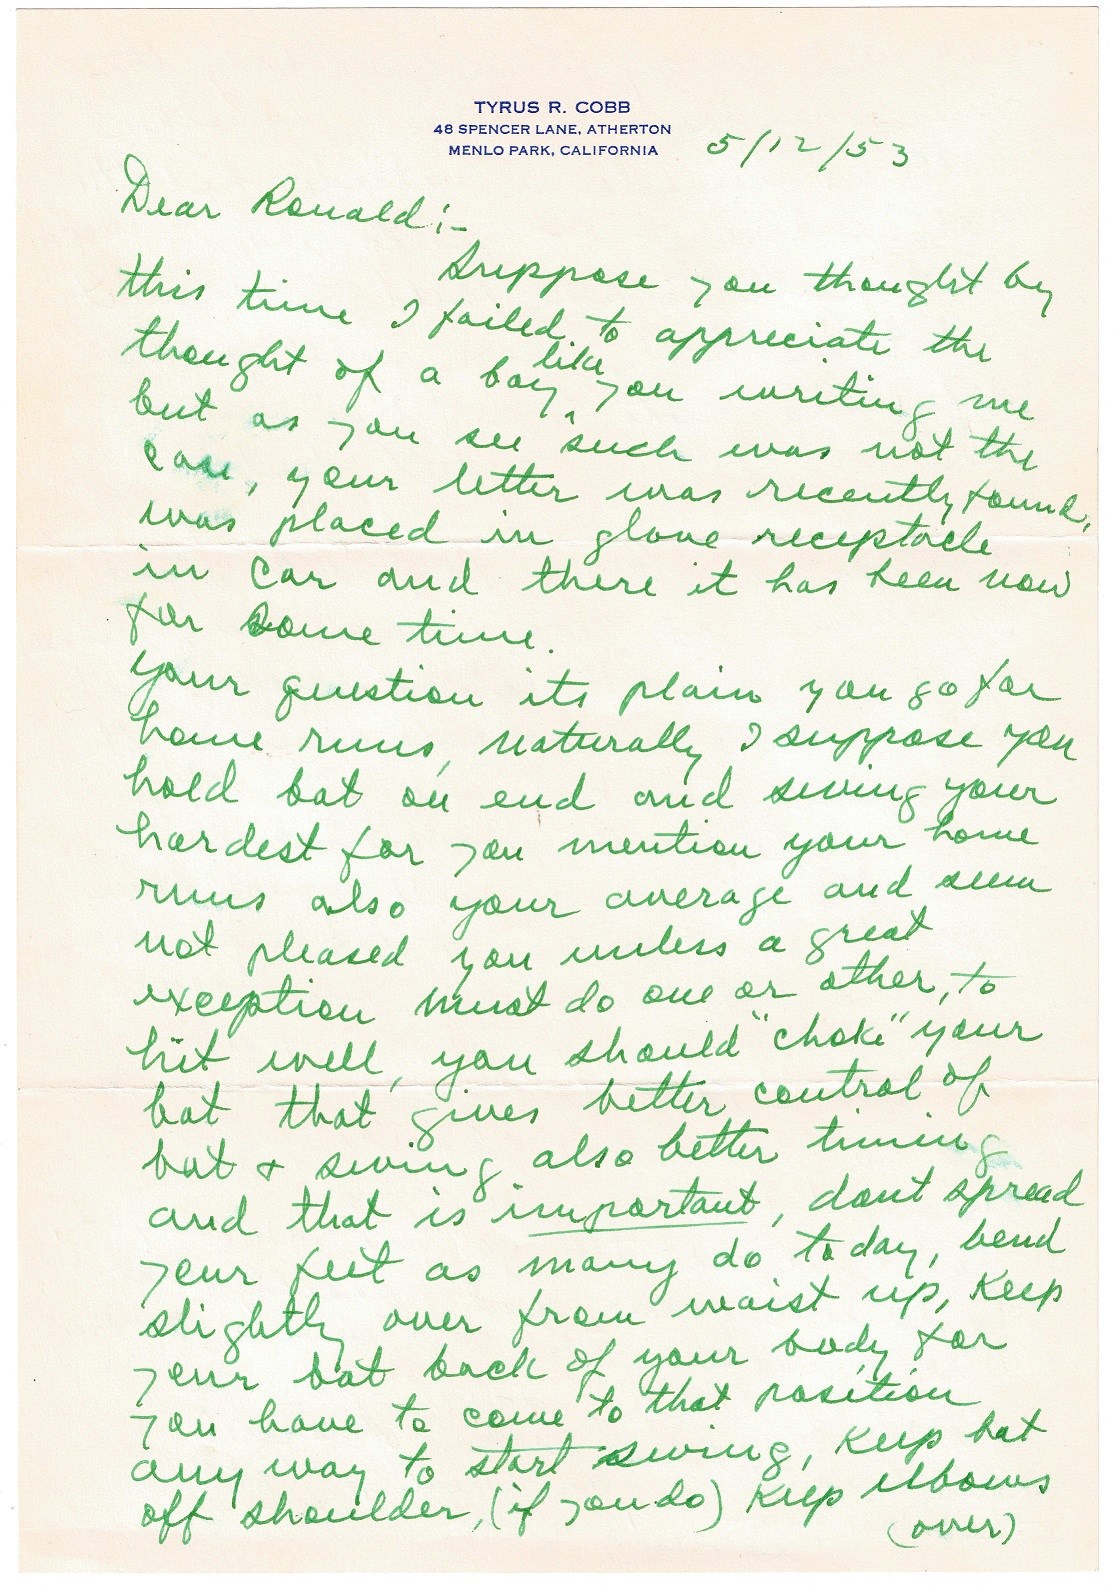 Baseball Autographs - Gorgeous 1953 Ty Cobb Signed Handwritten Letter with Fabulous Hitting Advice Content (JSA)